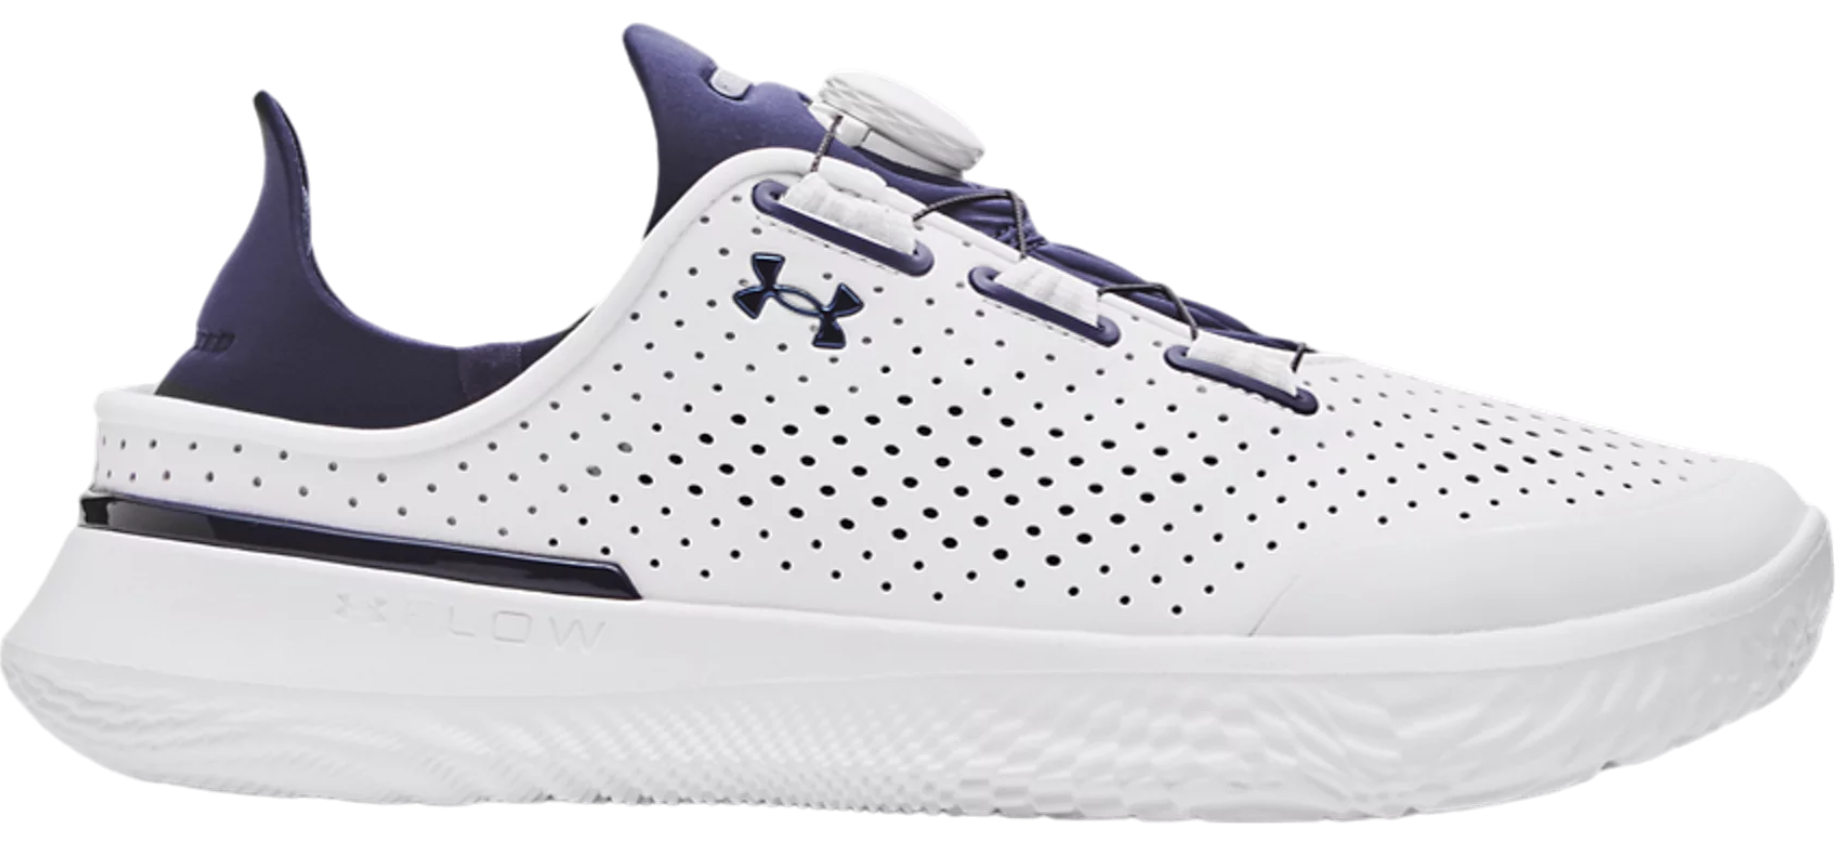 Fitness shoes Under Armour Flow Slipspeed Trainr SYN